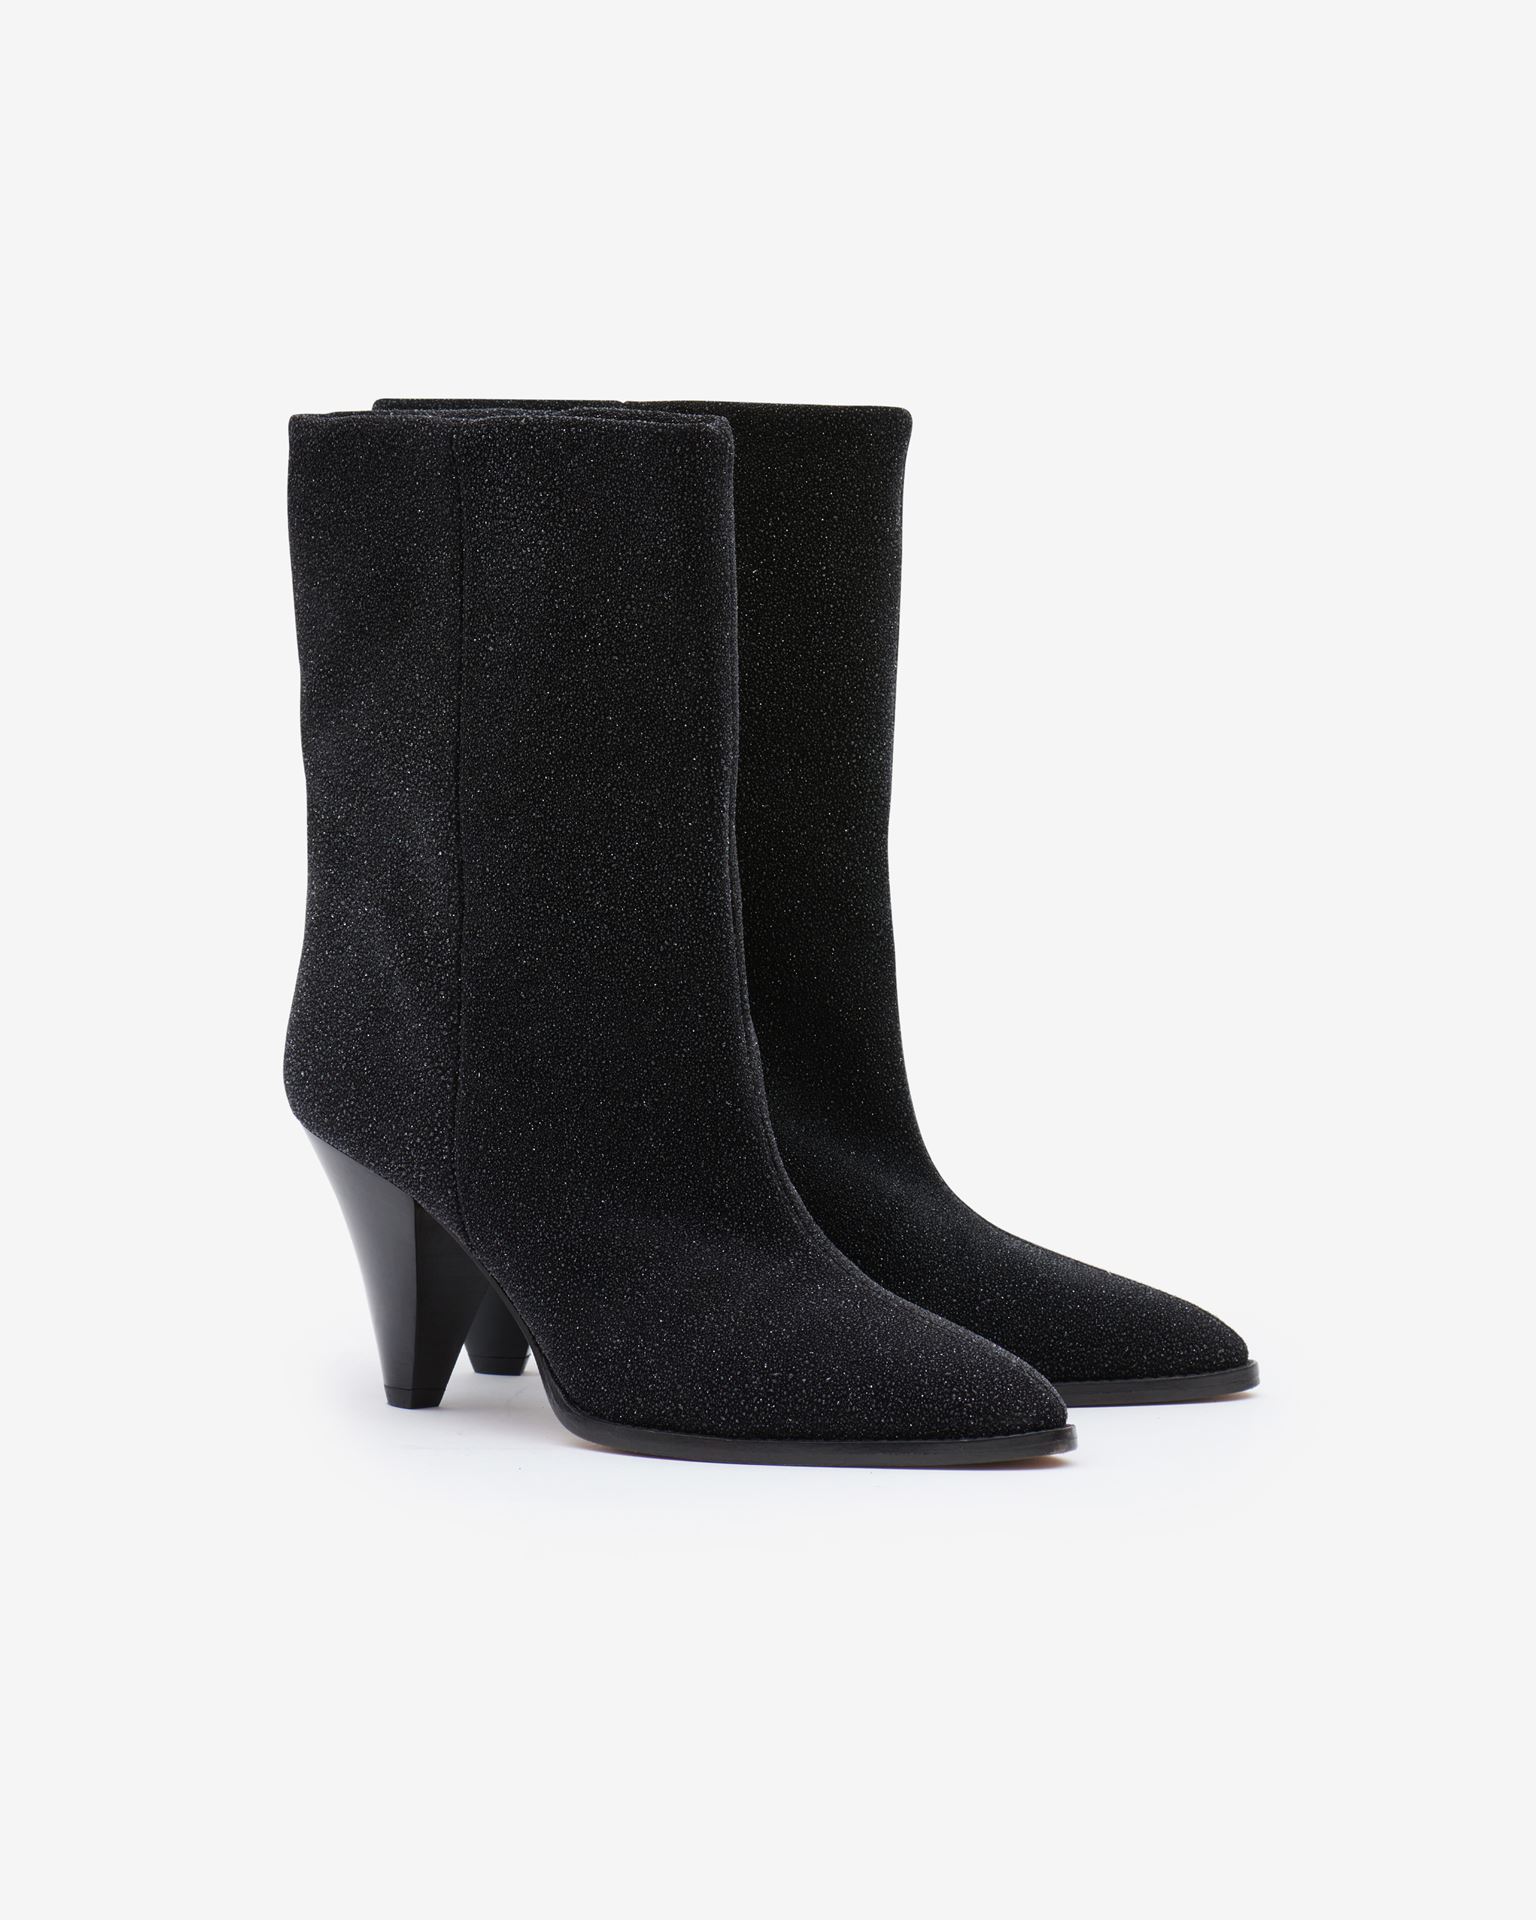 Isabel Marant, Rouxa Glitter Suede Leather Boots - Women - Black